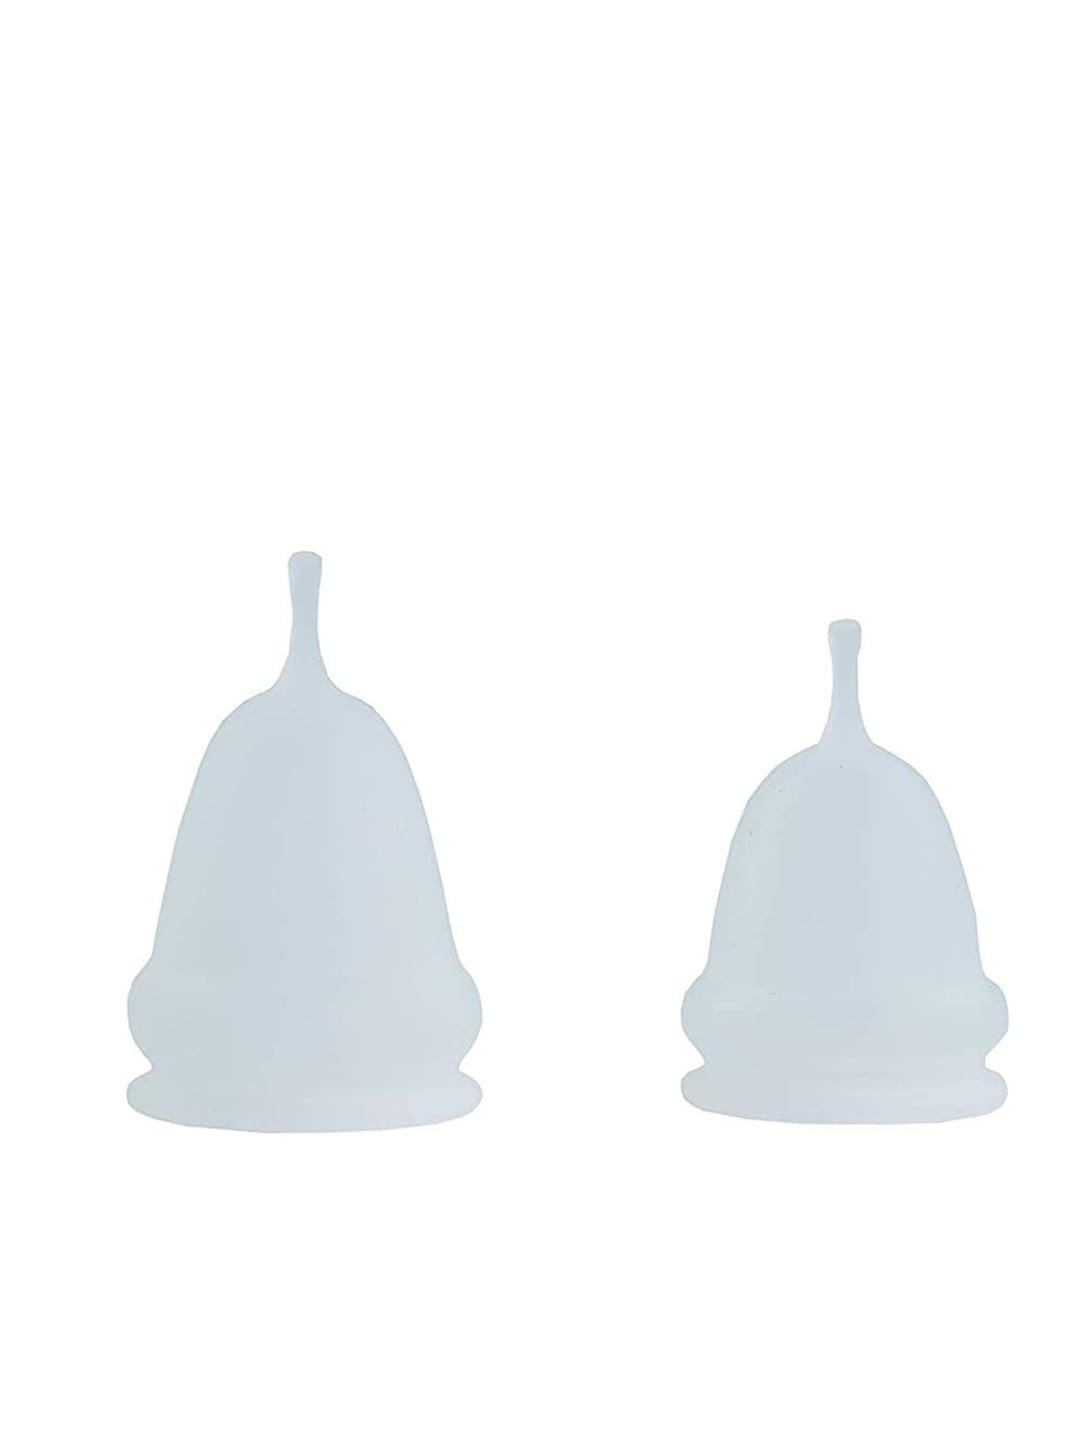 Pure Cups Set of 2 Latex Free Medical Grade Reusable Menstrual Cups - Small & Large